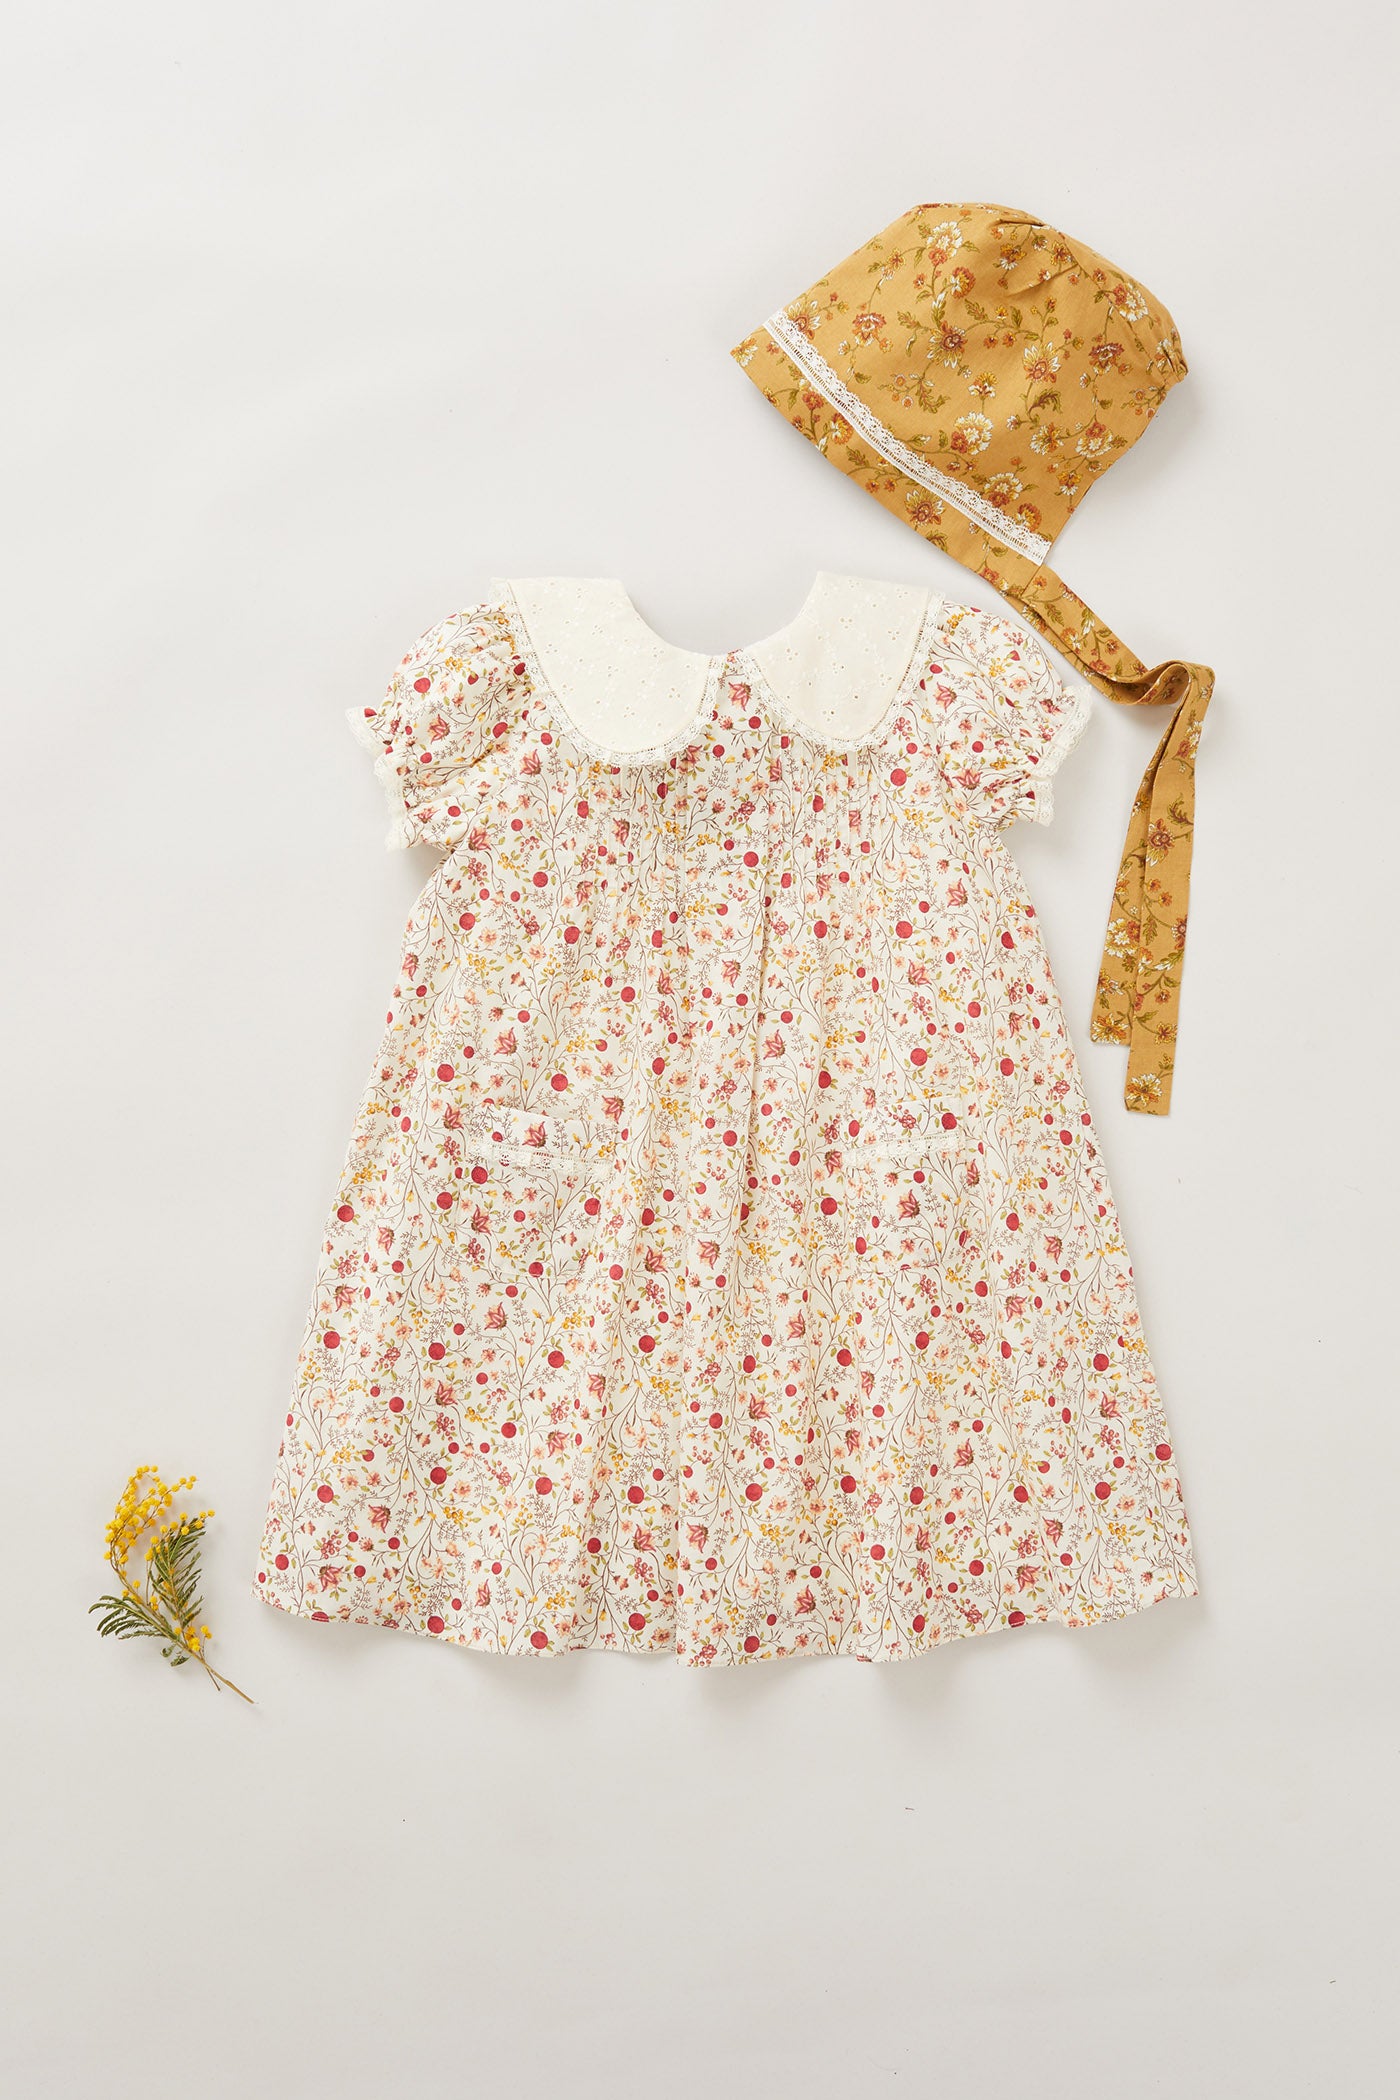 Bubble Dress in Spring Berries